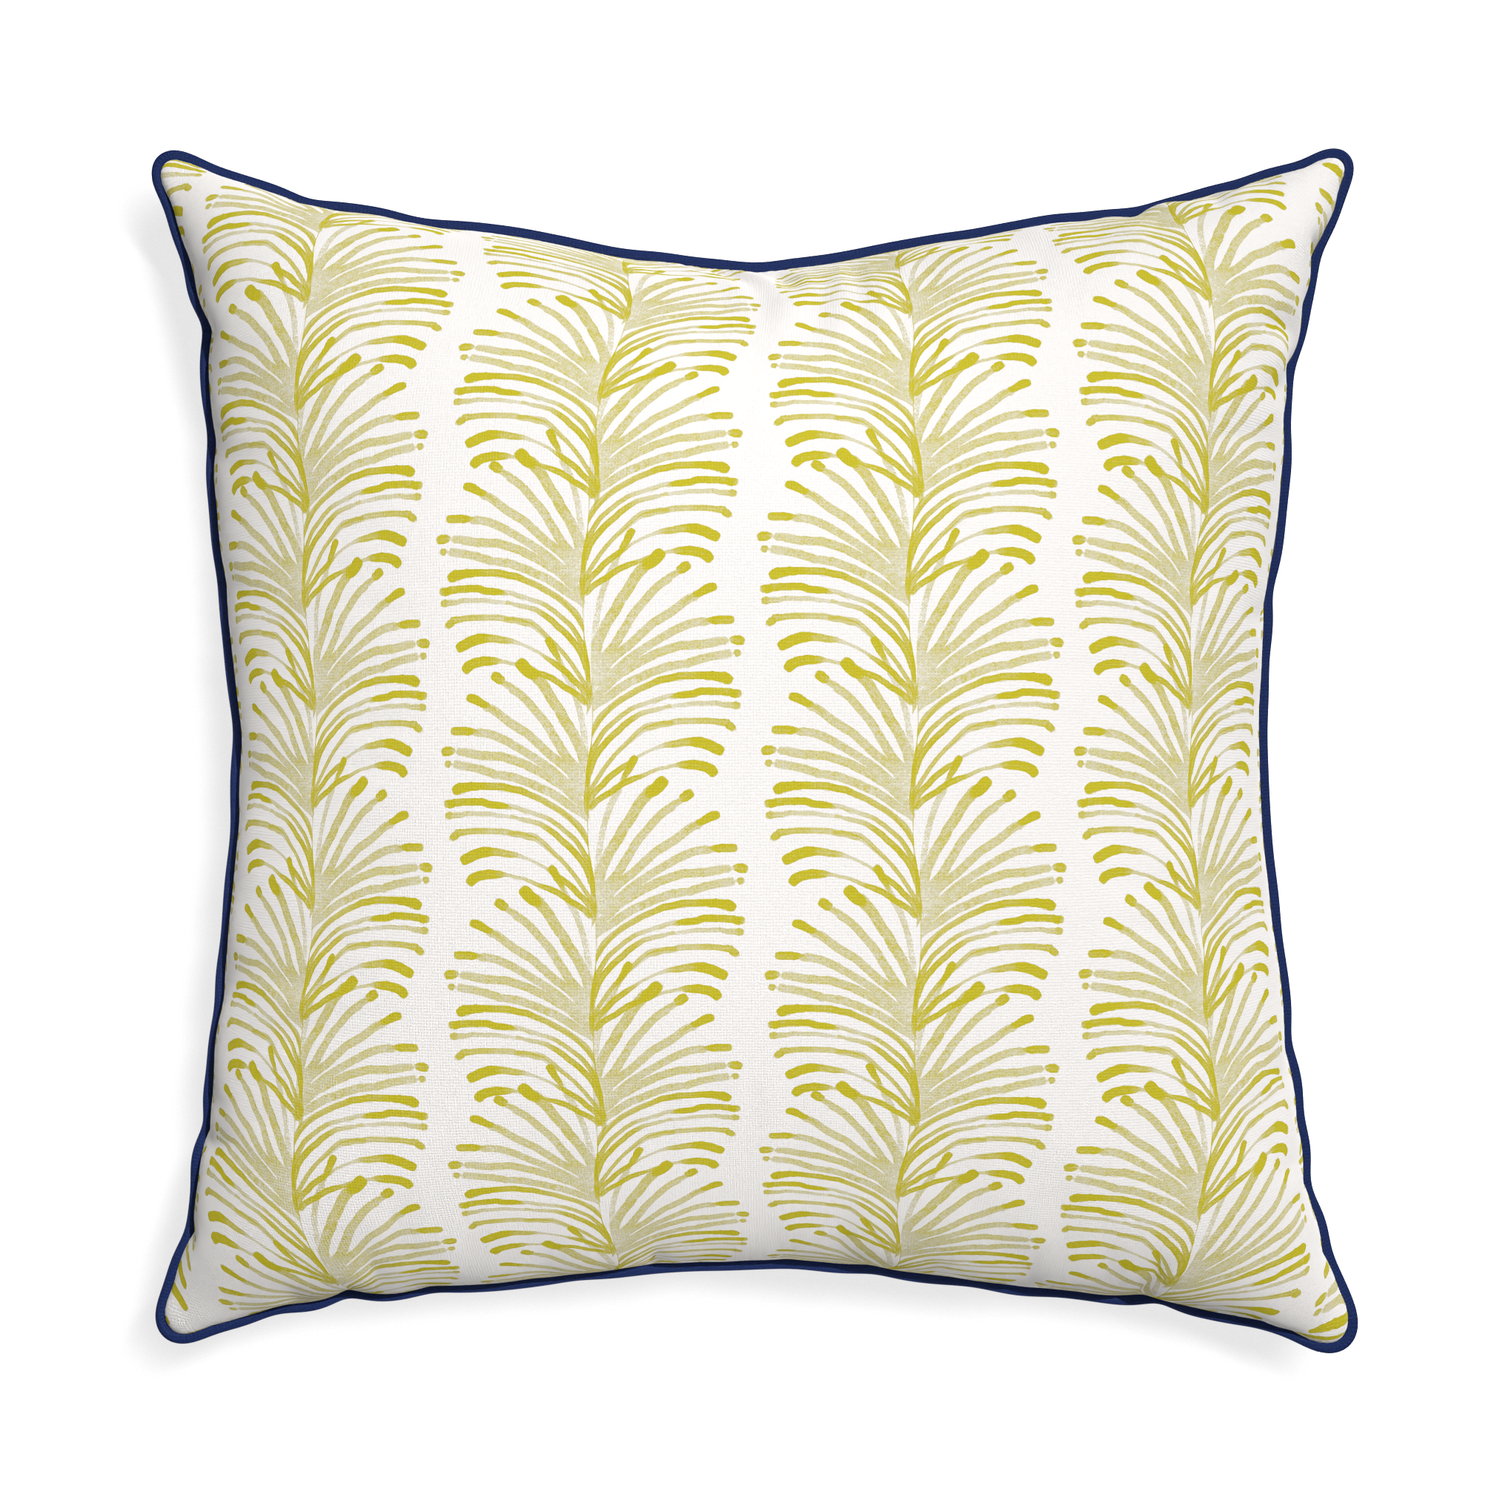 Euro-sham emma chartreuse custom pillow with midnight piping on white background